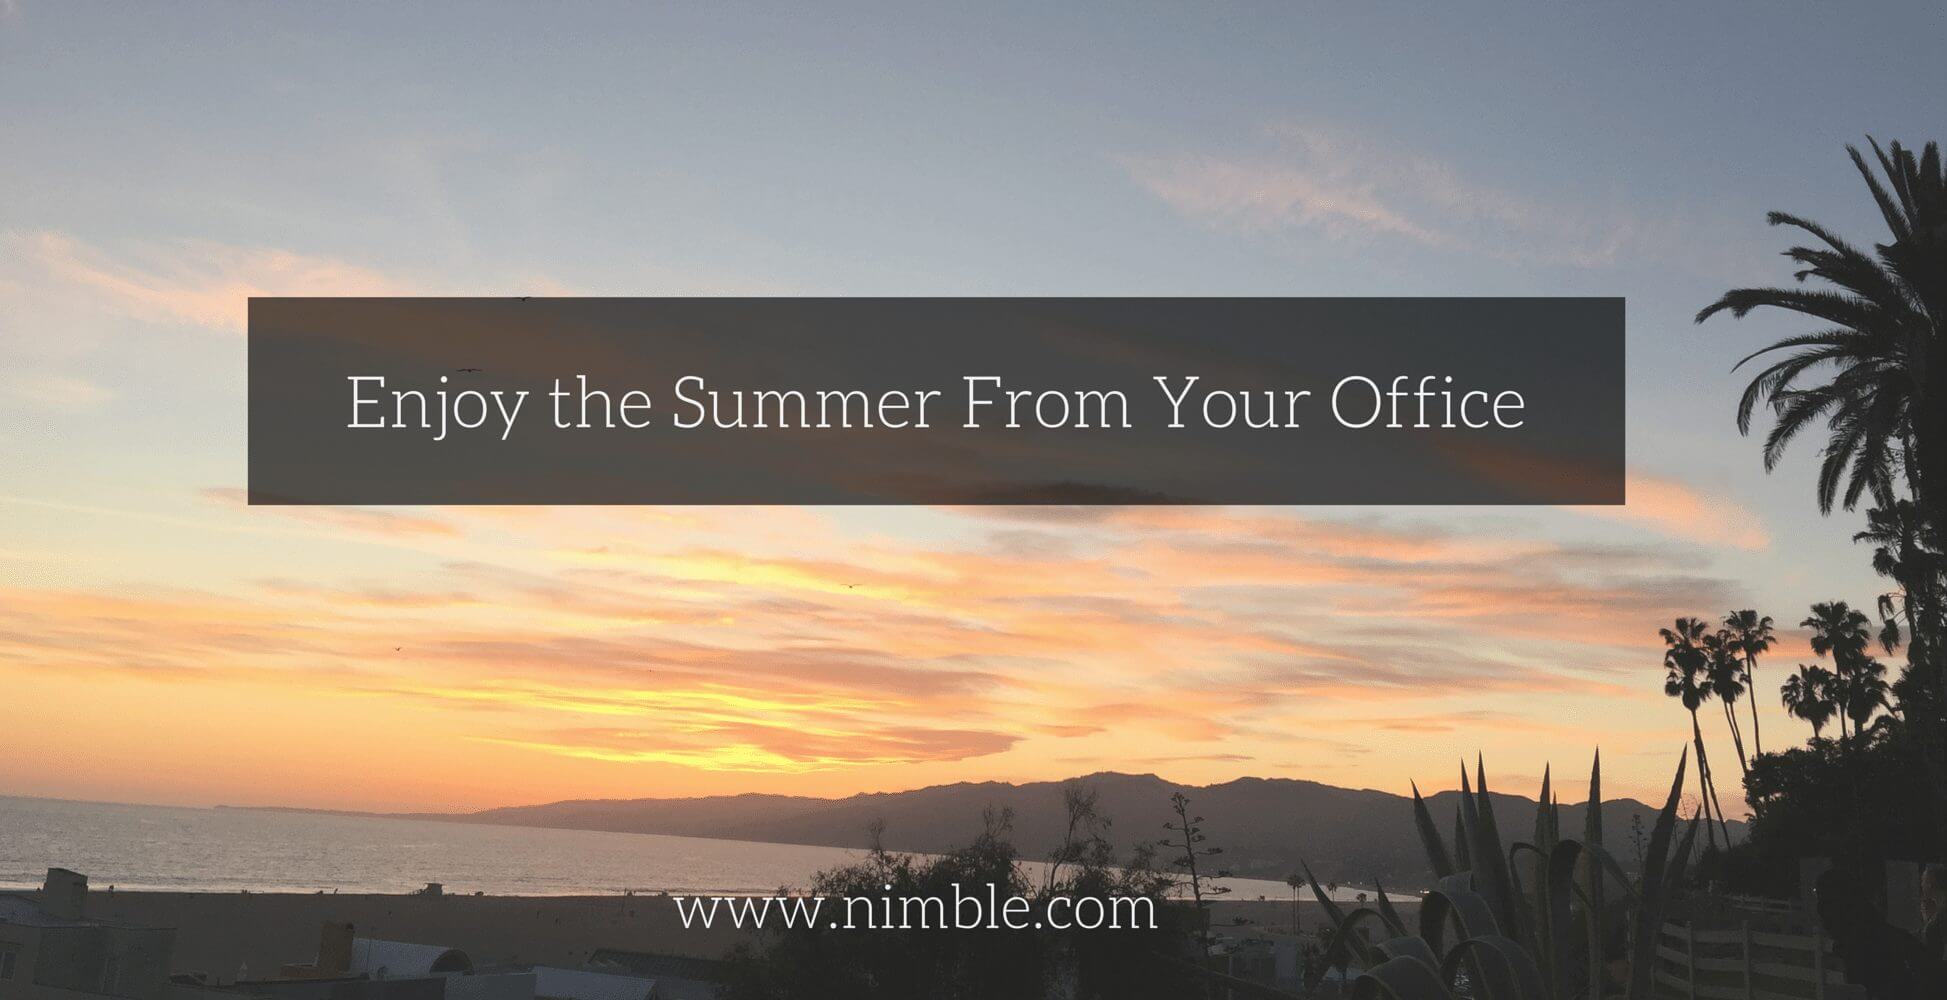 Enjoy the Summer From Your Office